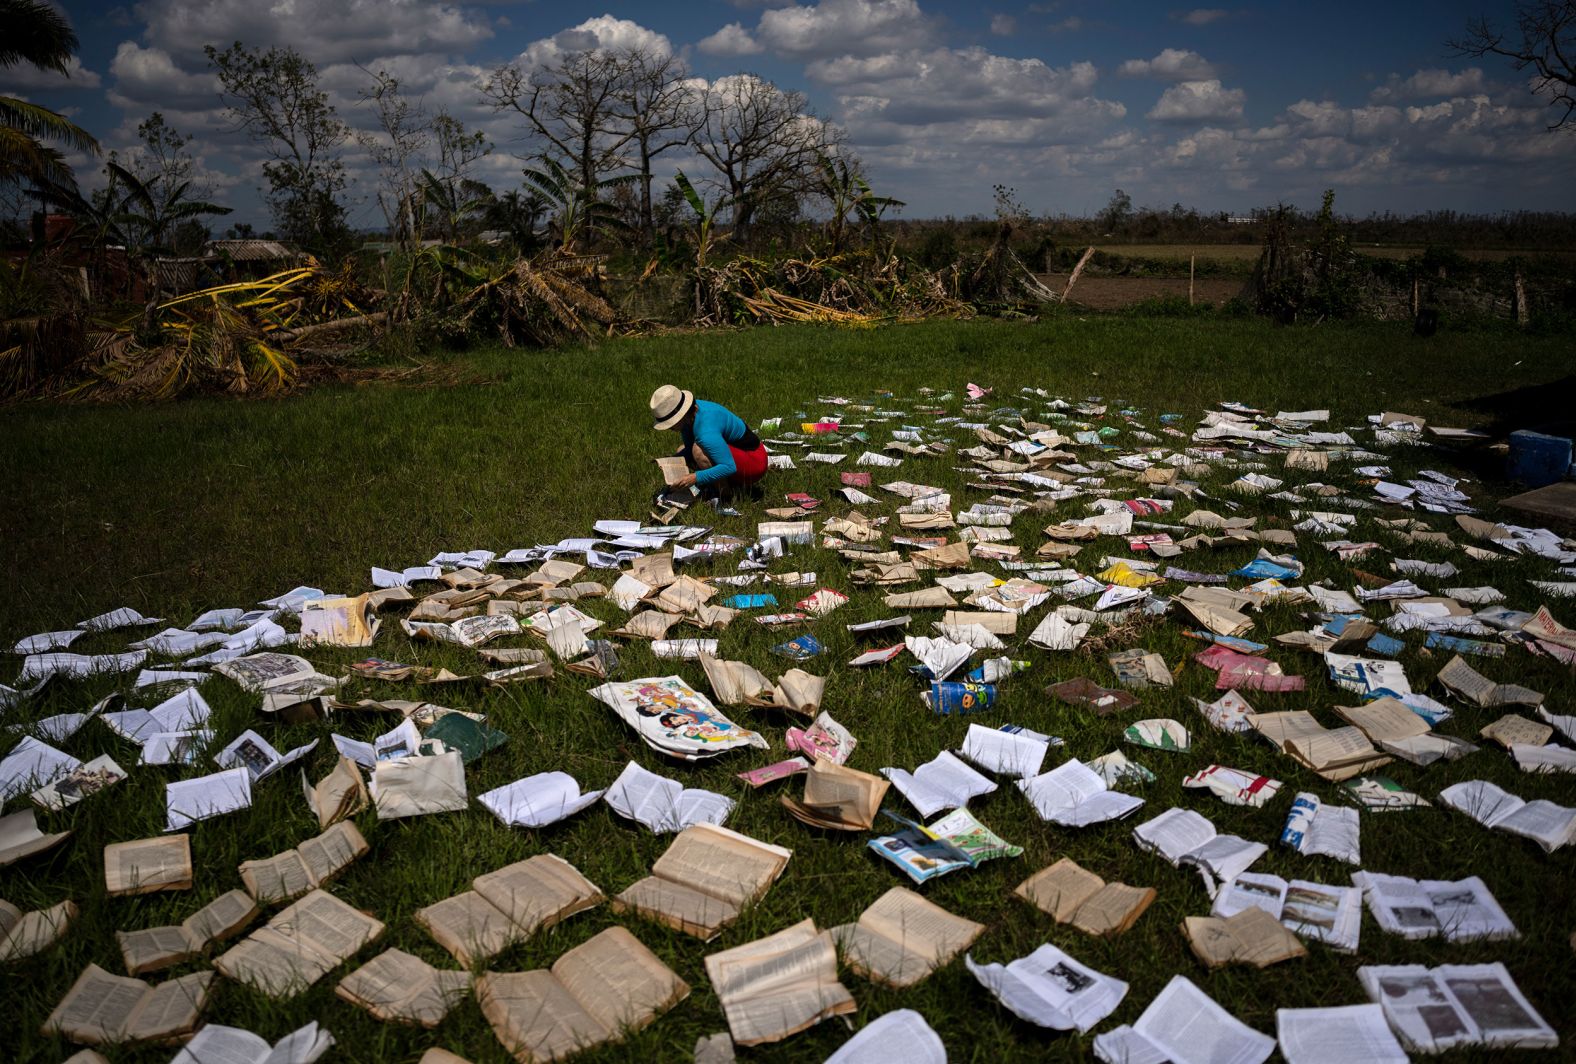 A teacher dries out books on Wednesday, October 5, at a school that was heavily damaged by Hurricane Ian in La Coloma, Cuba.